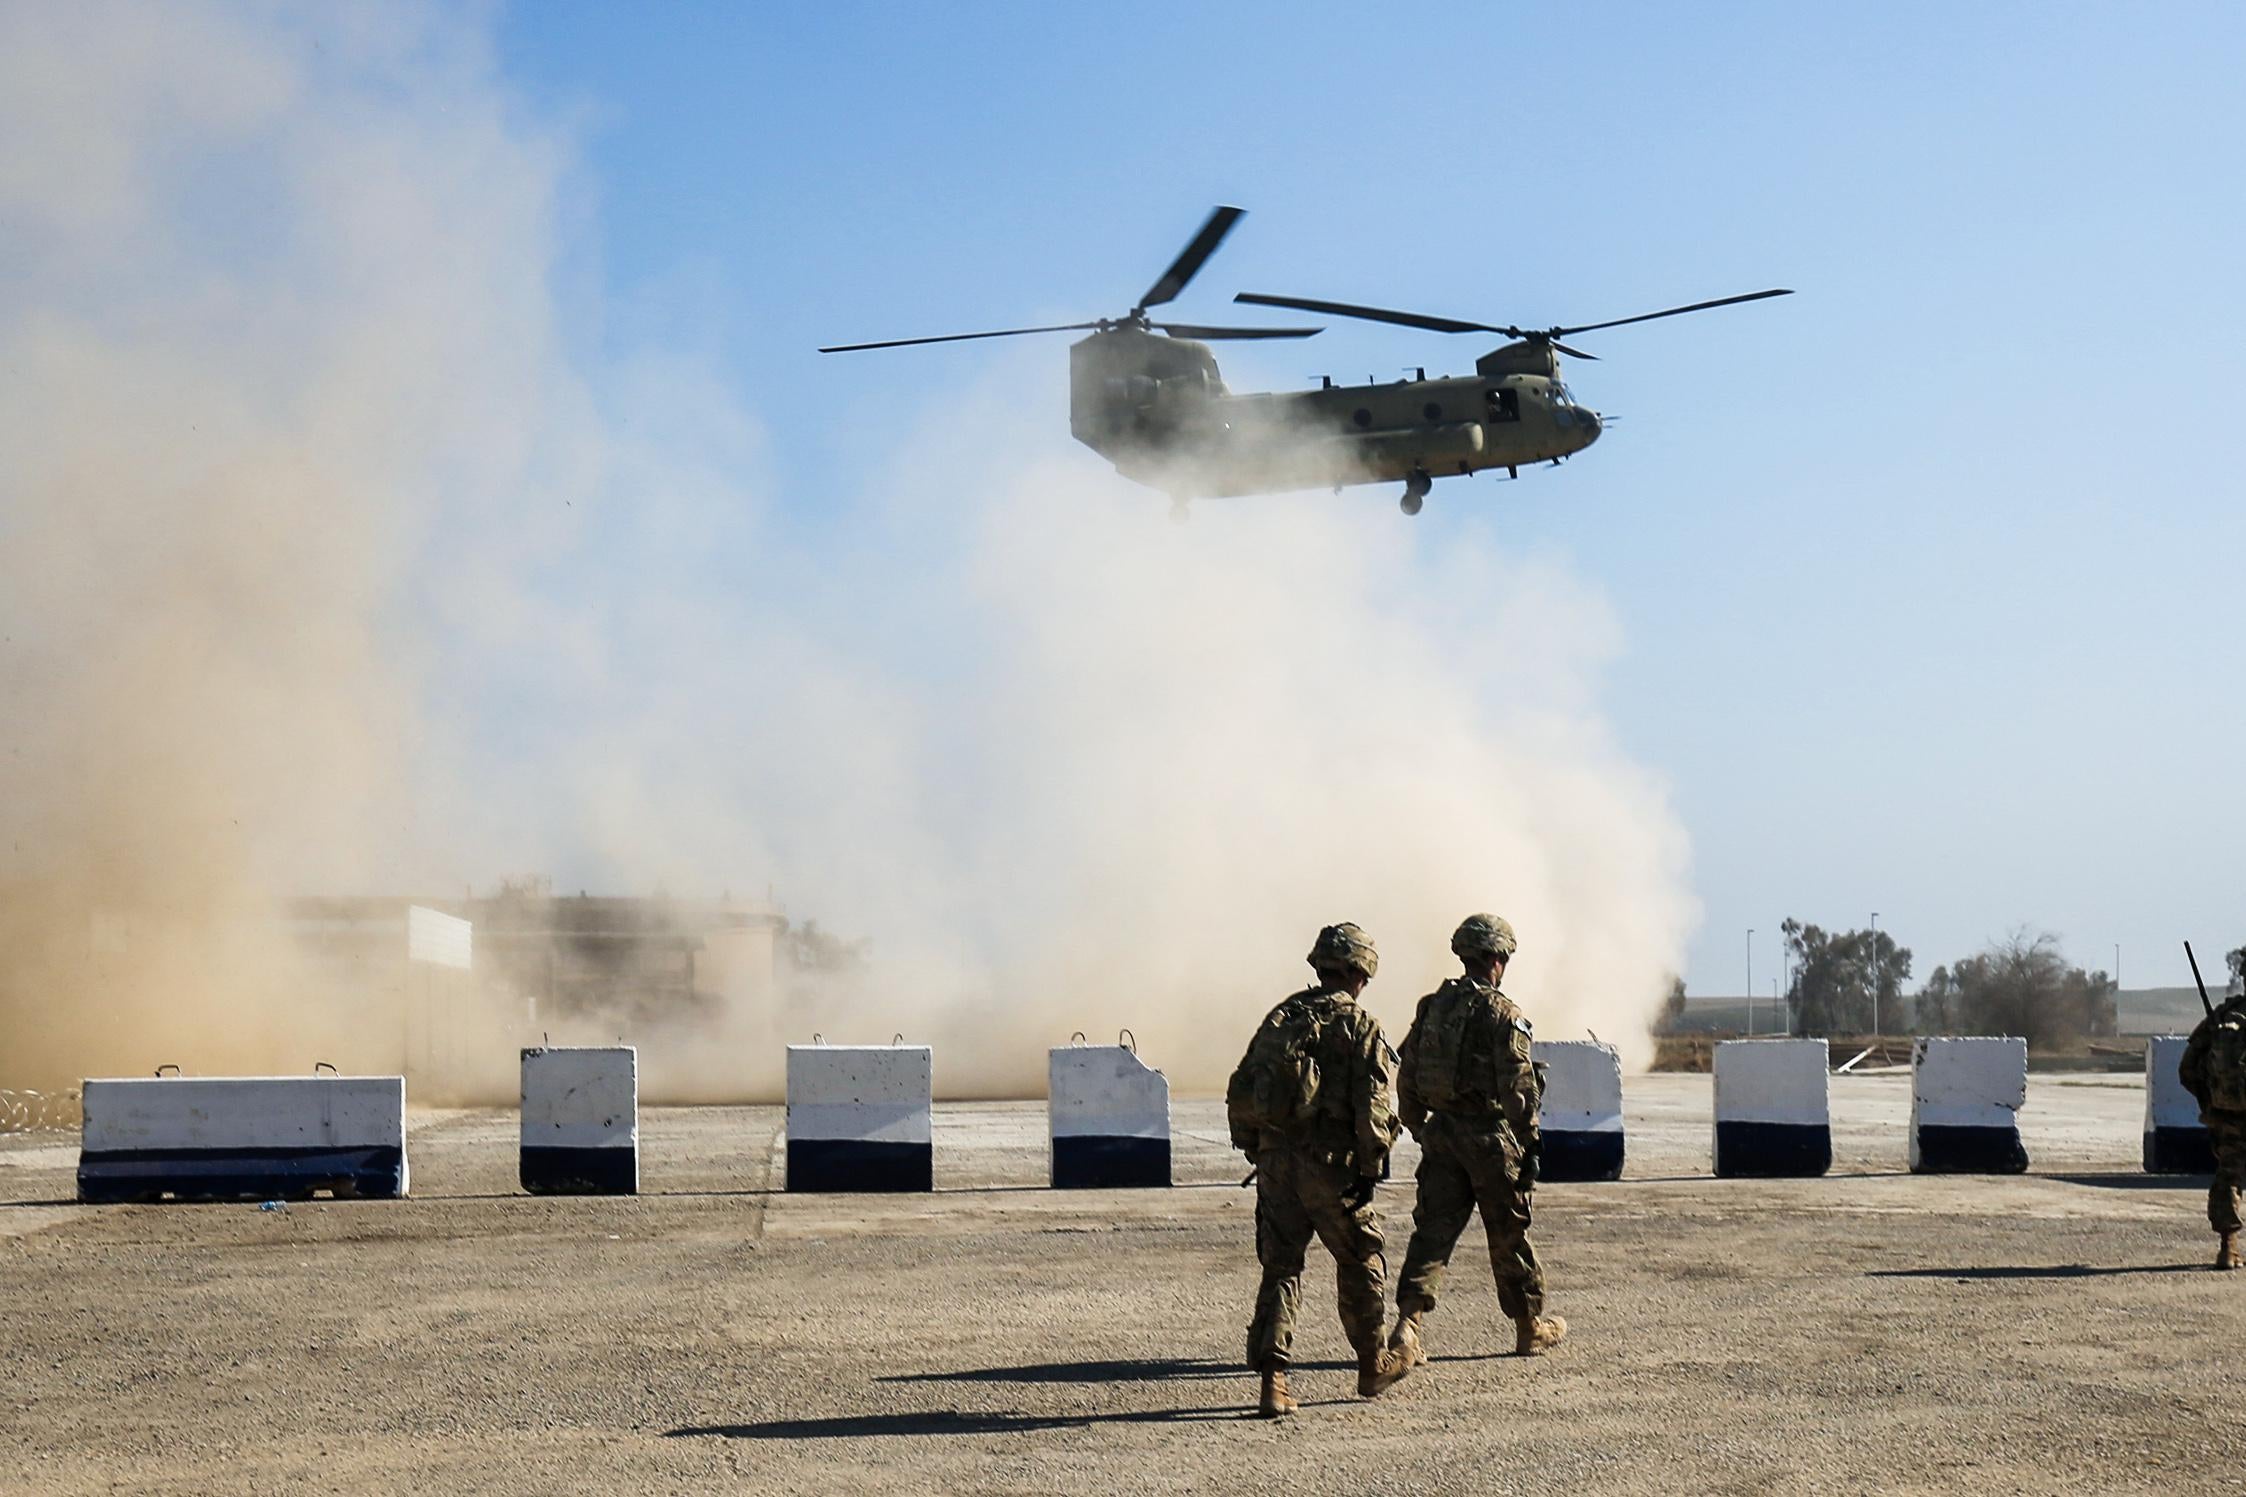 A helicopter takes off above some U.S. soldiers in Iraq.